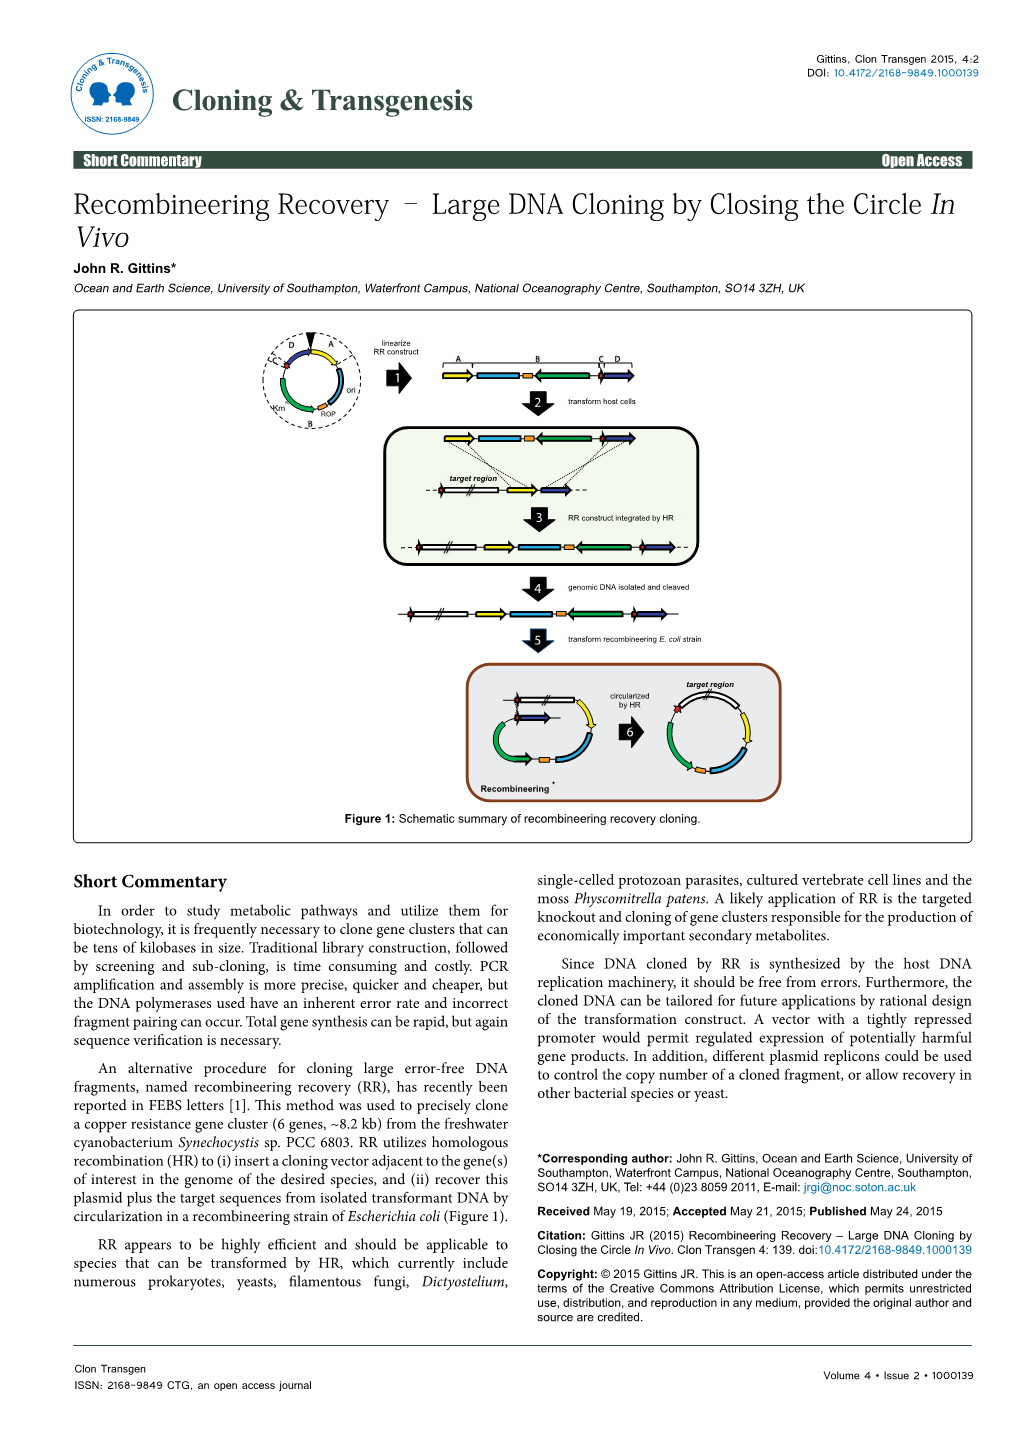 Recombineering Recovery – Large DNA Cloning by Closing the Circle in Vivo John R